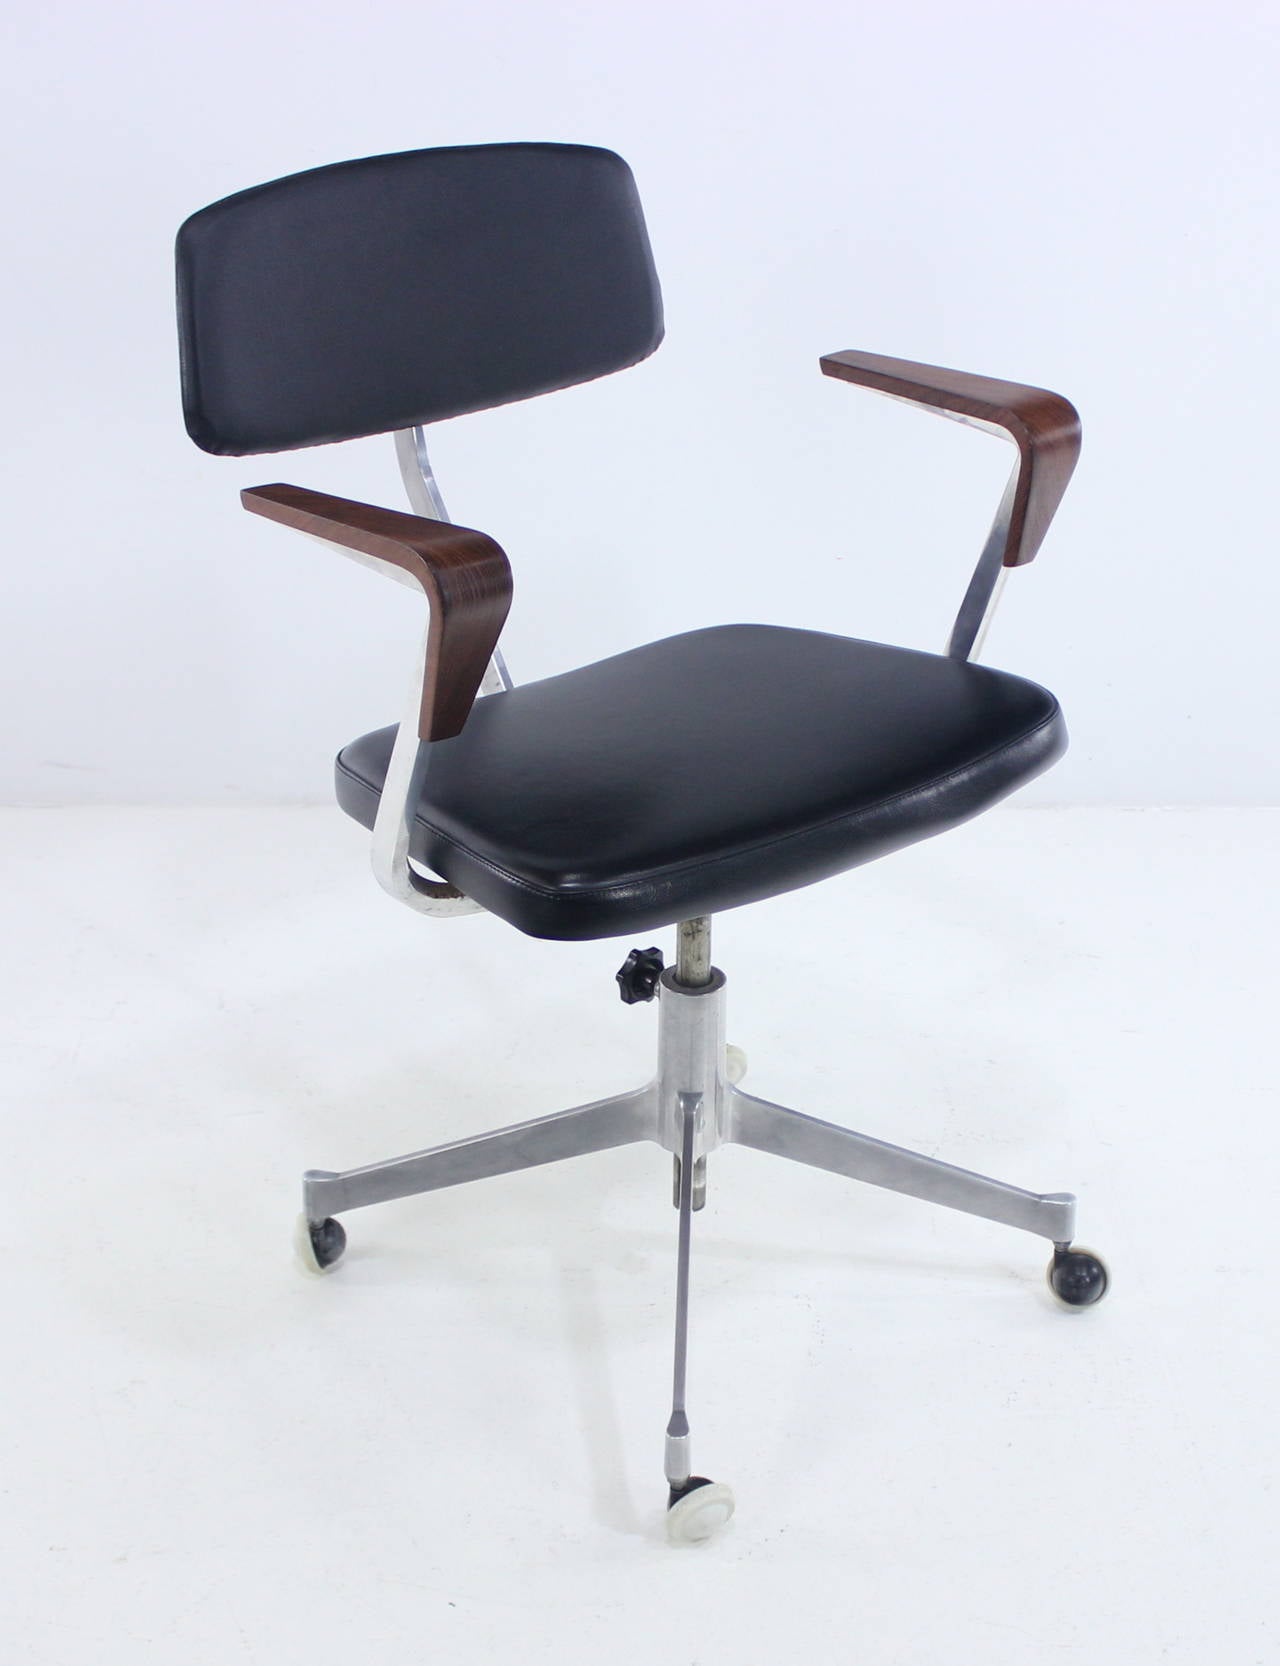 Extraordinary Danish modern office chair manufactured by Cardinal.
Aluminum base with original wheels.
Sculptural teak armrests.
Chair swivels, height adjusts, back tilts.
Original black vinyl upholstery.
Matchless quality and price.
Low